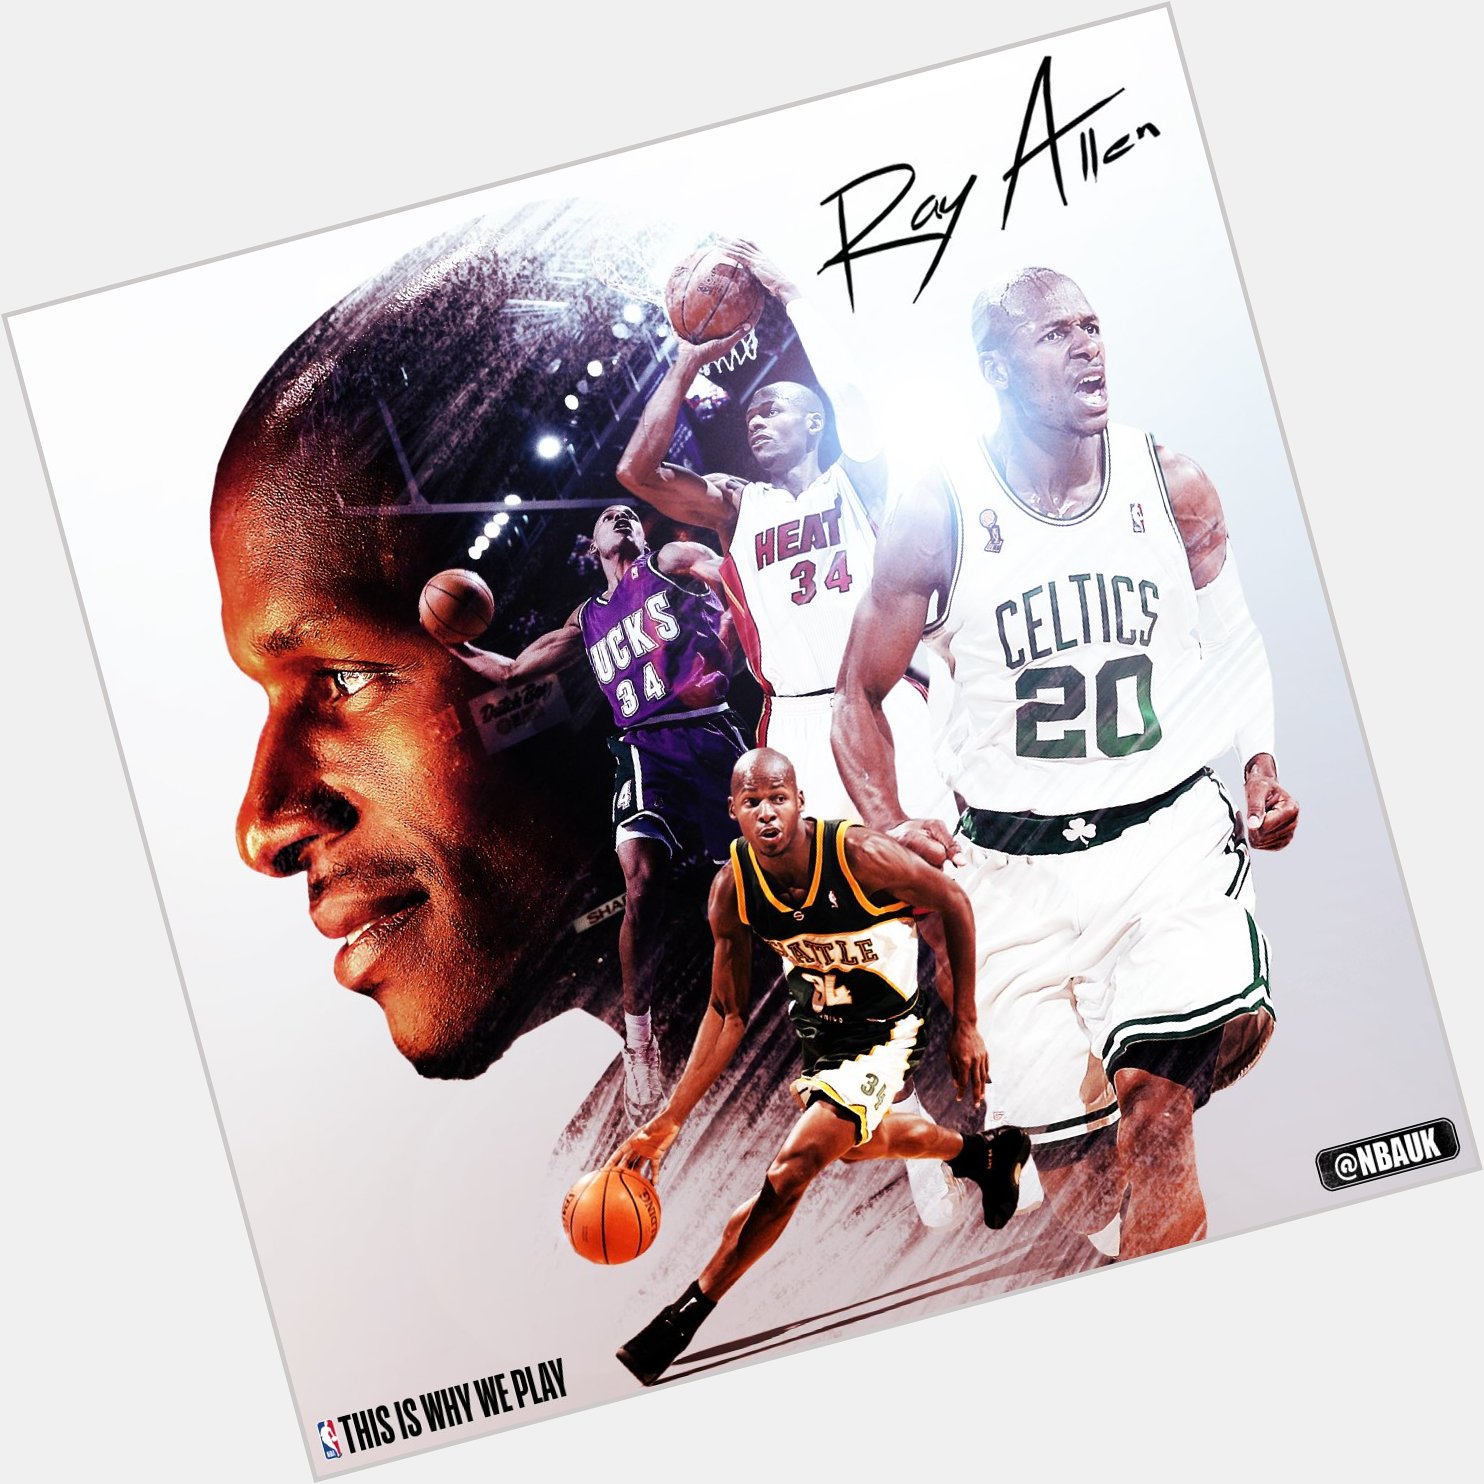   Join us as we wish 2x NBA Champion and 10x NBA All-Star Ray Allen a very happy birthday! 